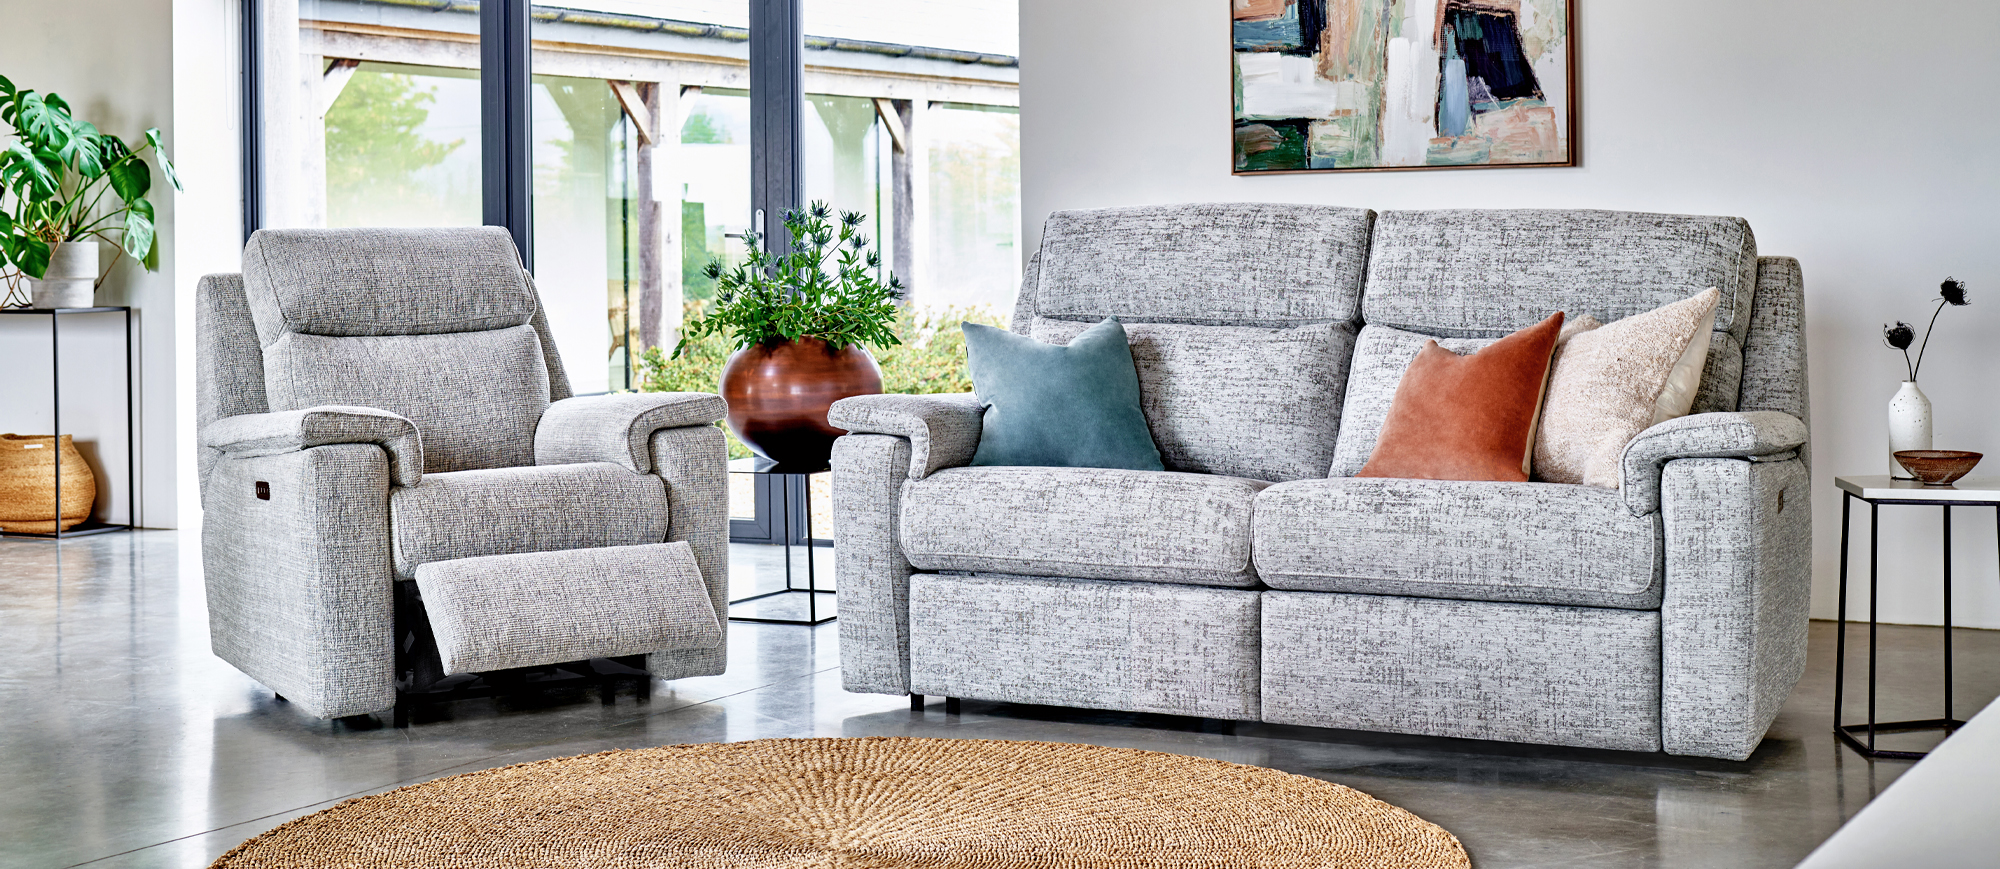 G Plan Chairs | Recliners, Armchairs & Snugglers | G Plan